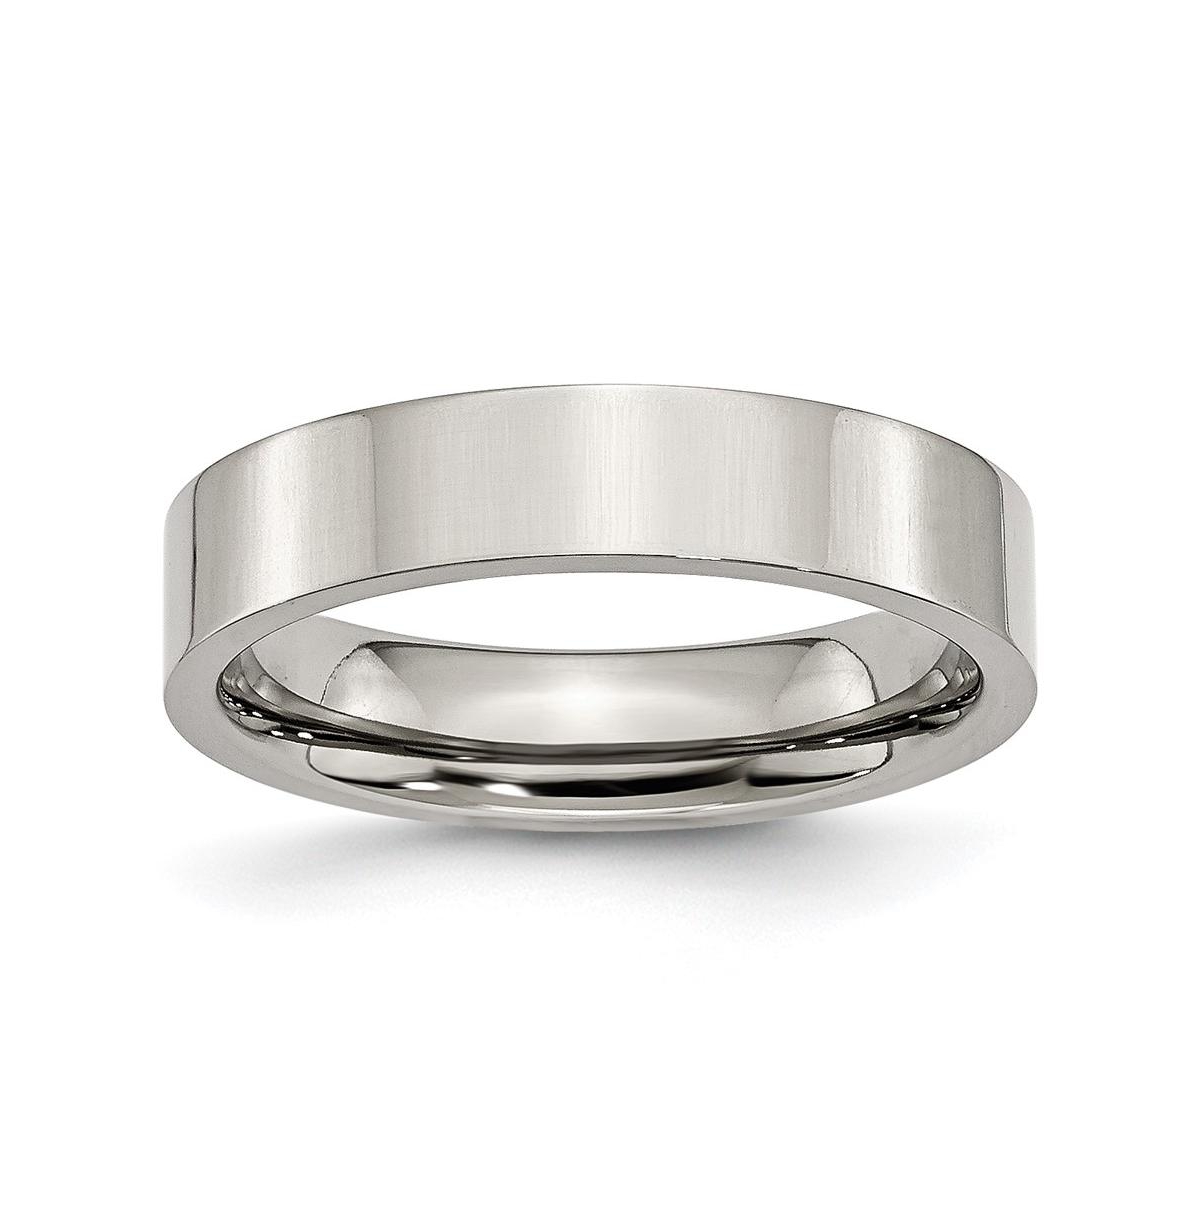 Stainless Steel Polished 5mm Flat Band Ring - Silver